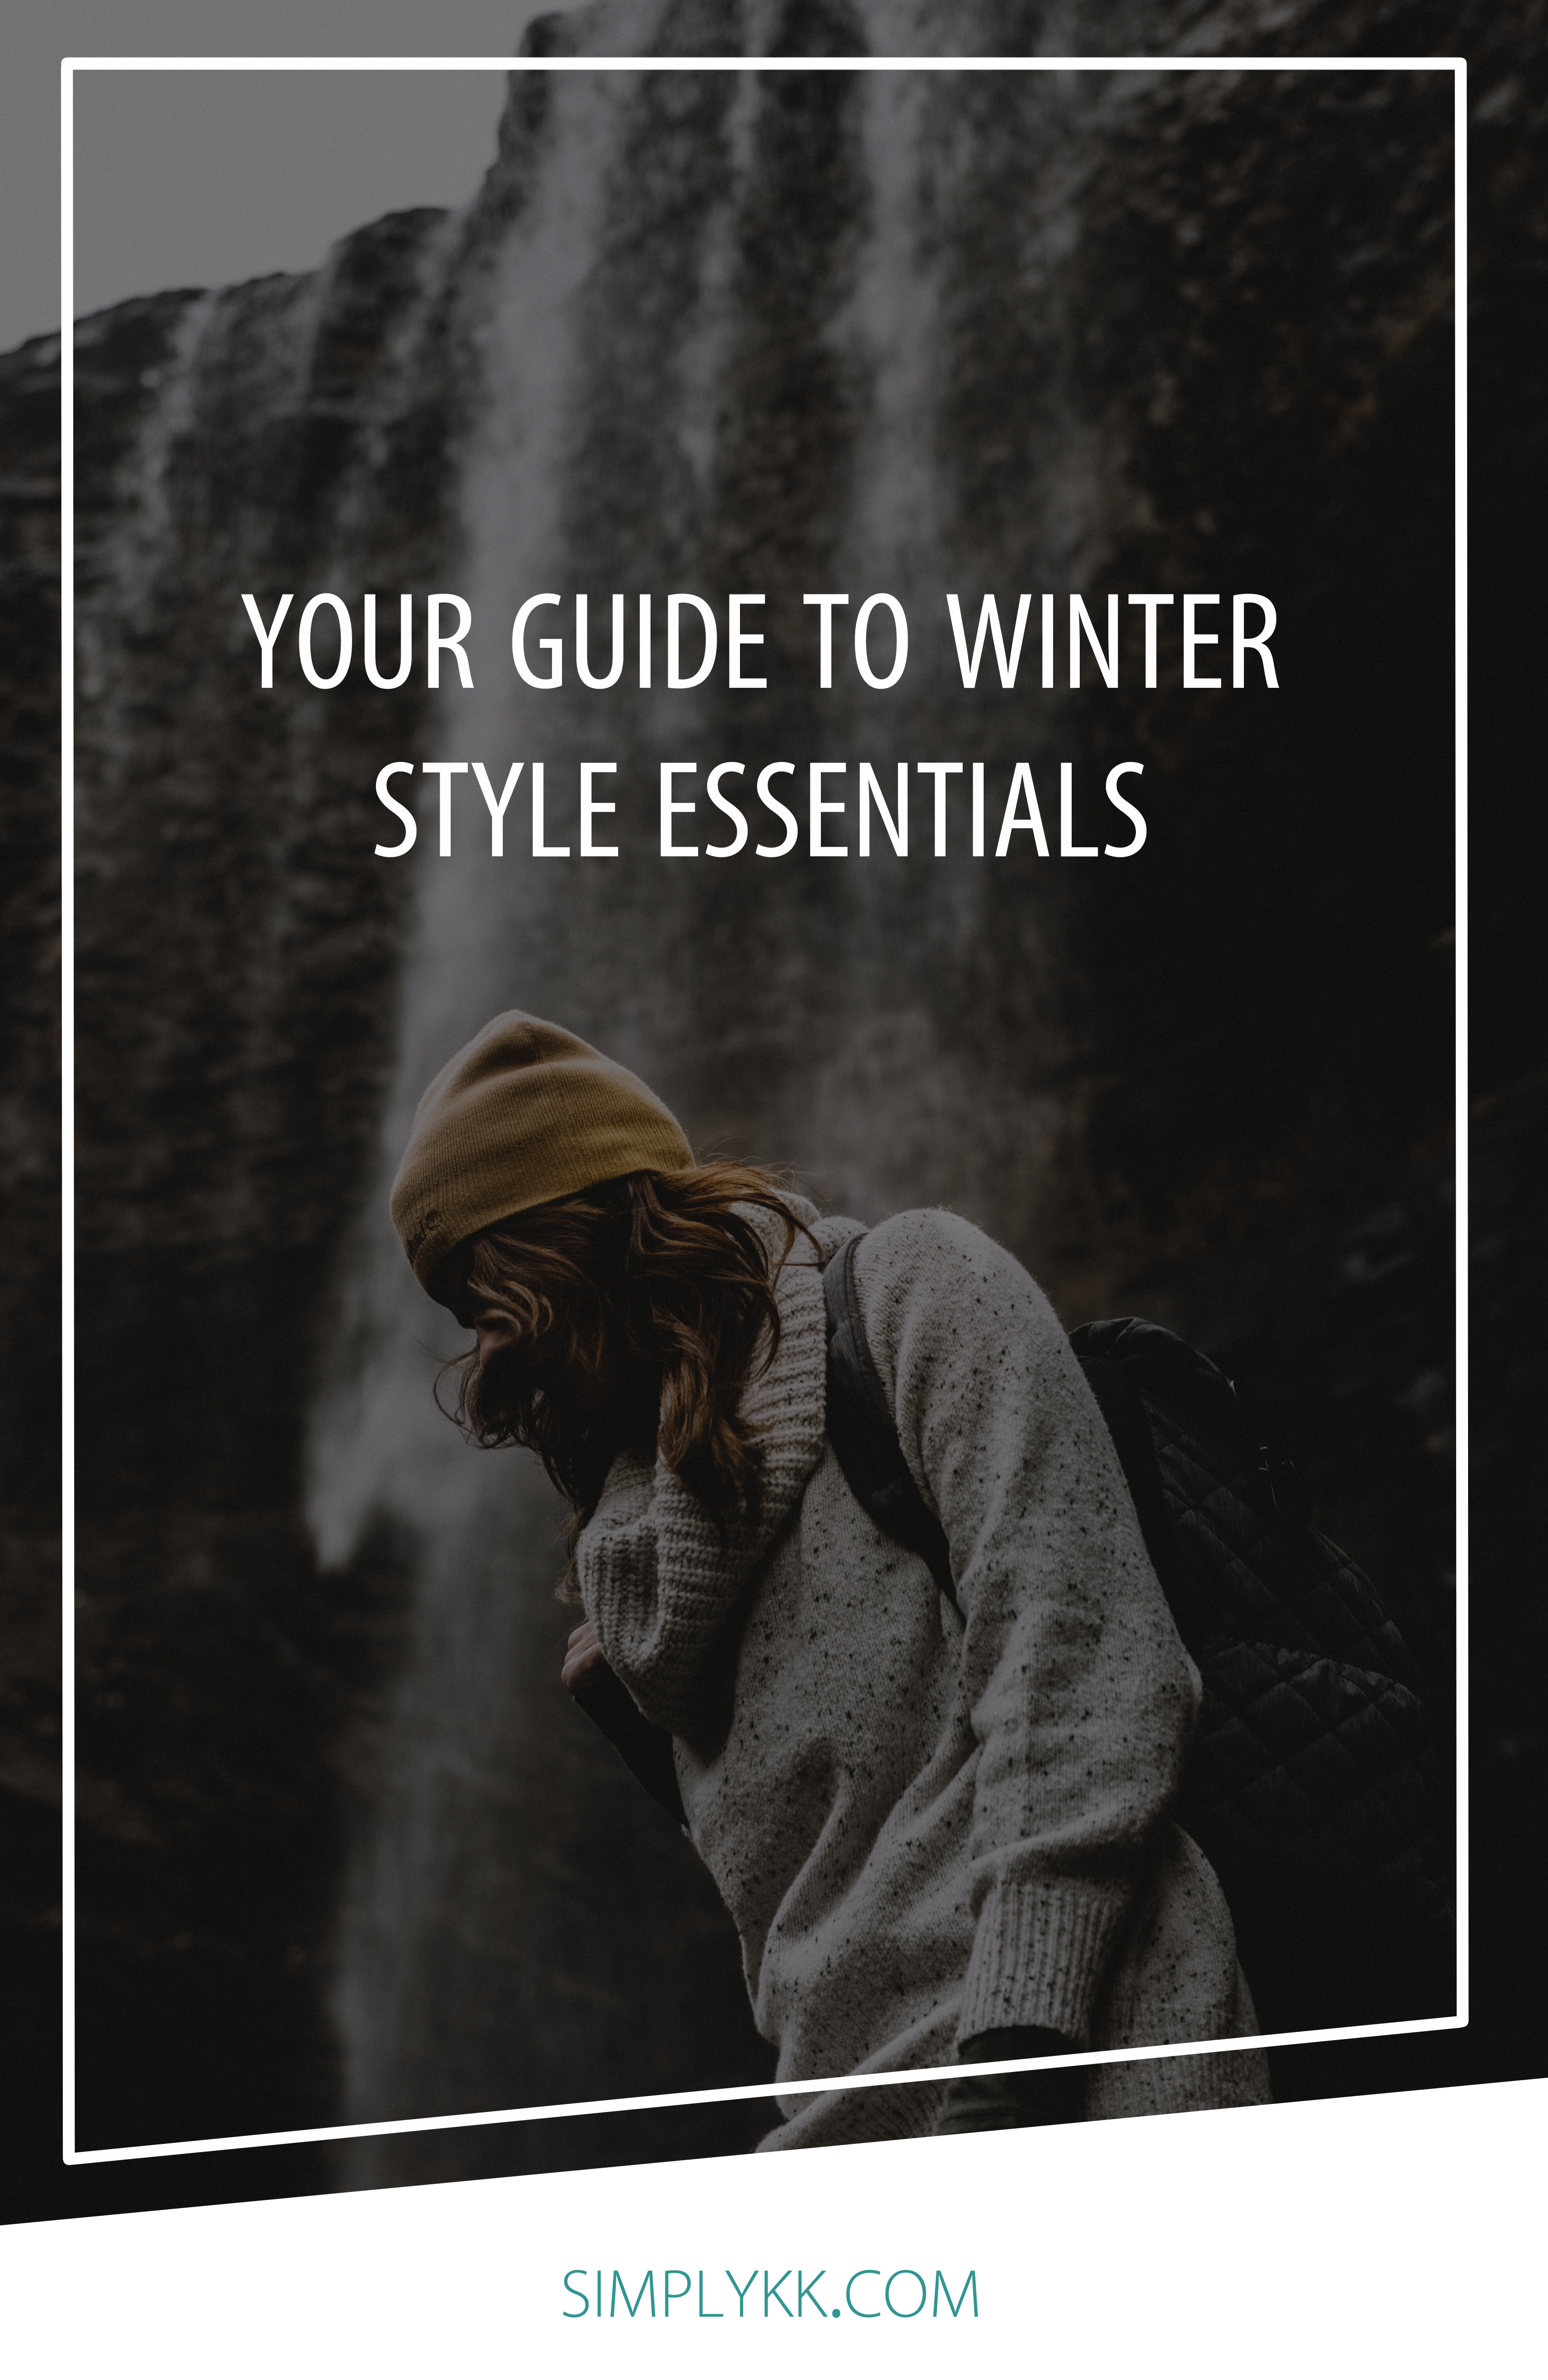 Your Guide to Winter Style Essentials